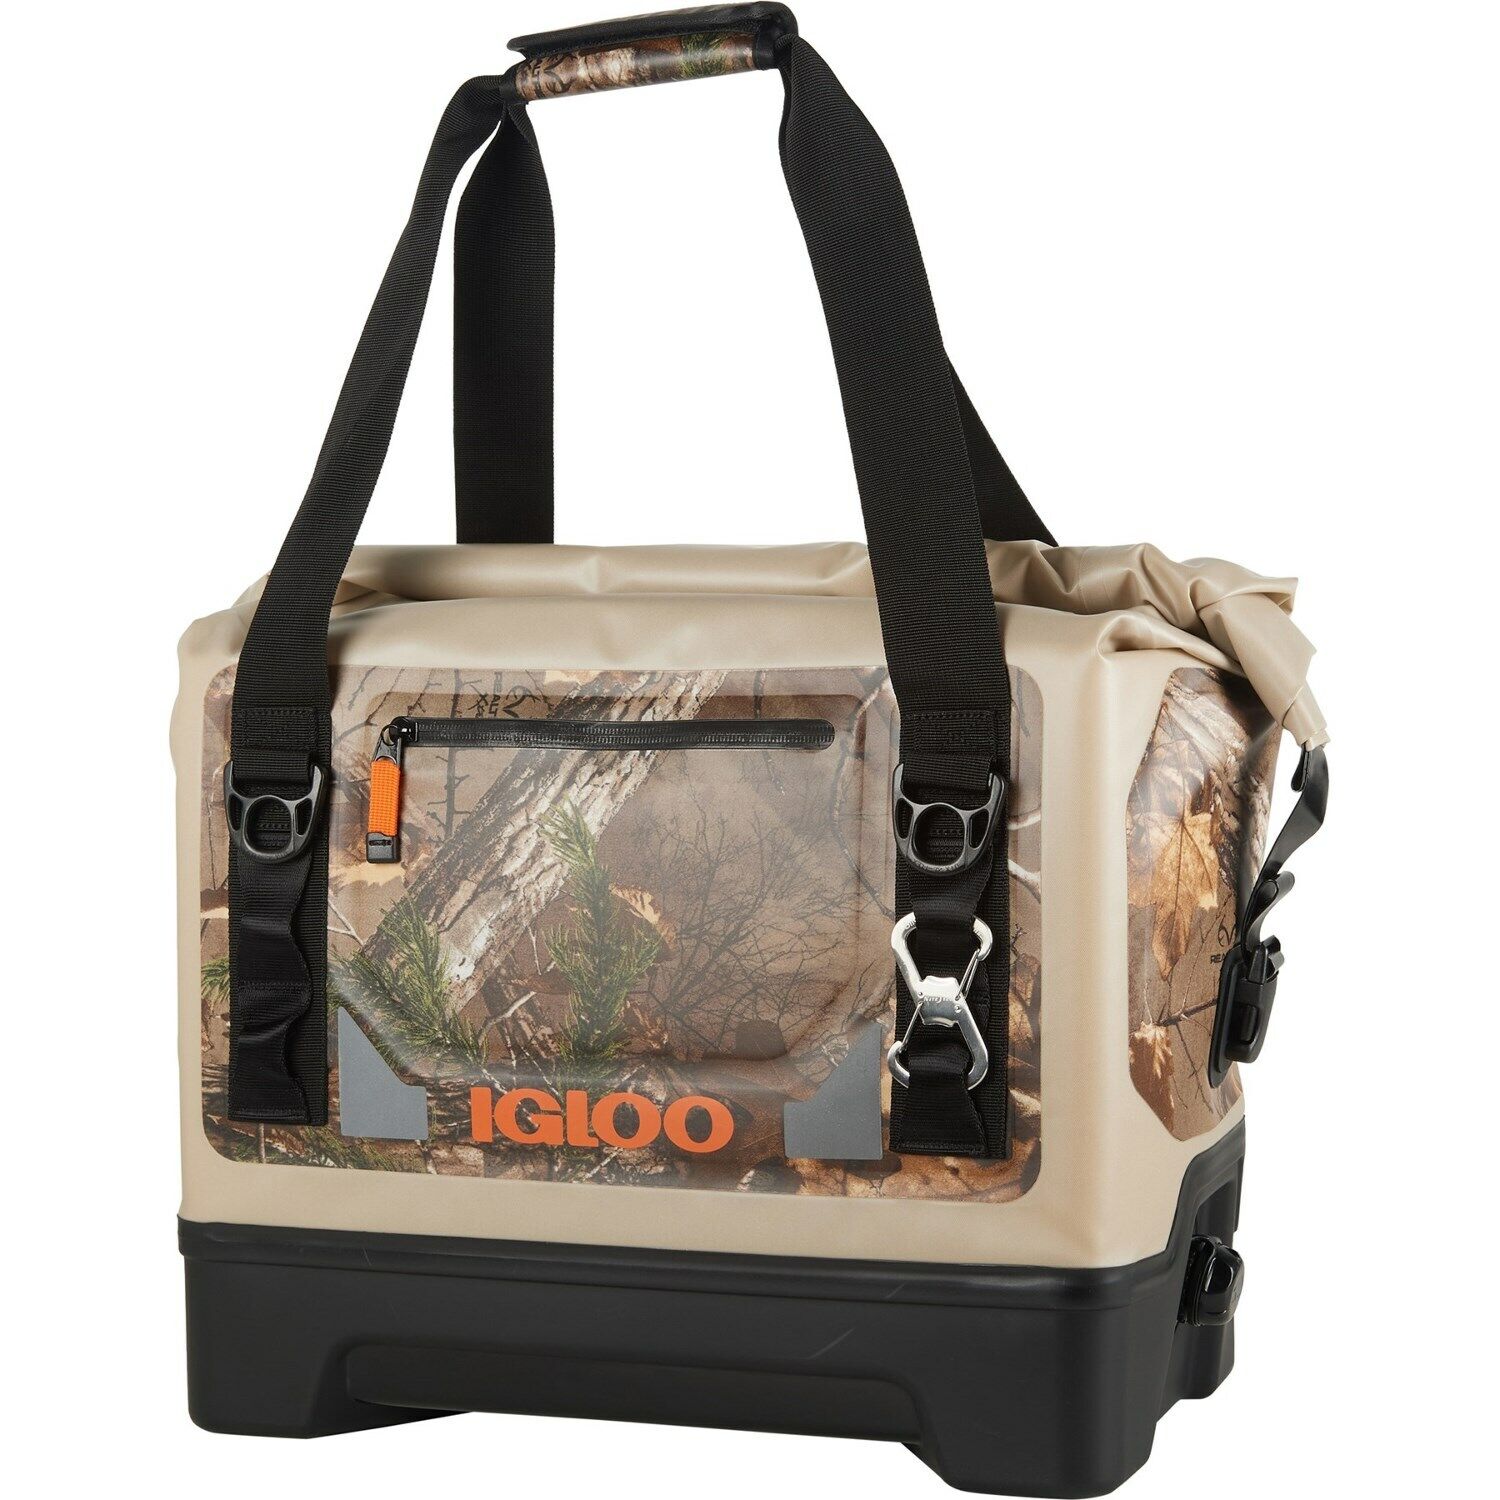 Igloo Sportsman Soft Sided Duffle Cooler - Color Realtree Camo P